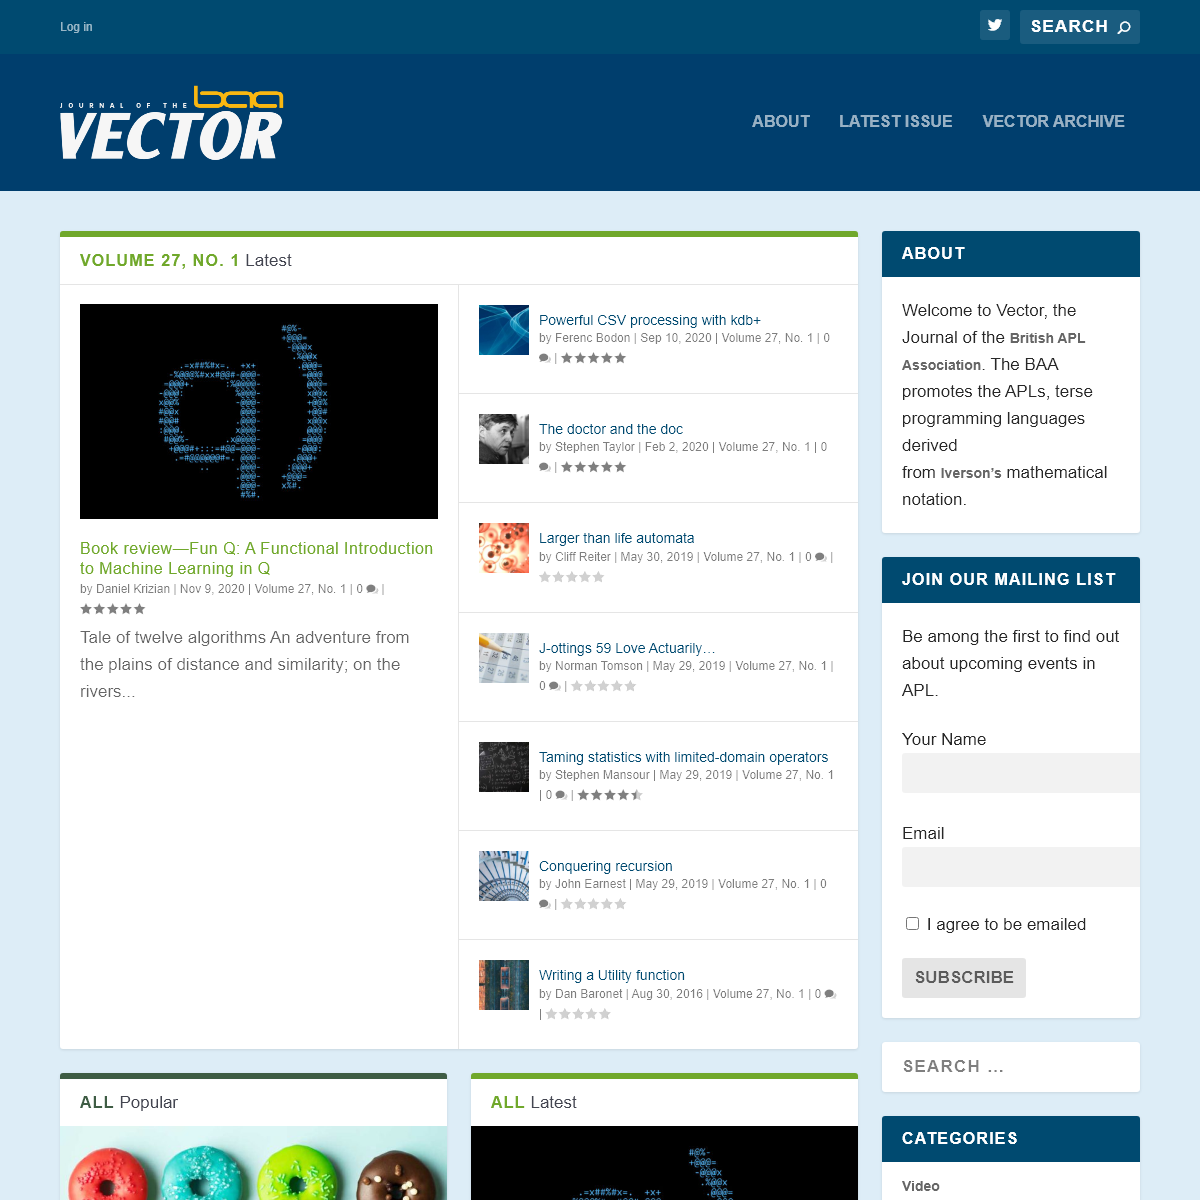 Vector - The Journal of the British APL Association